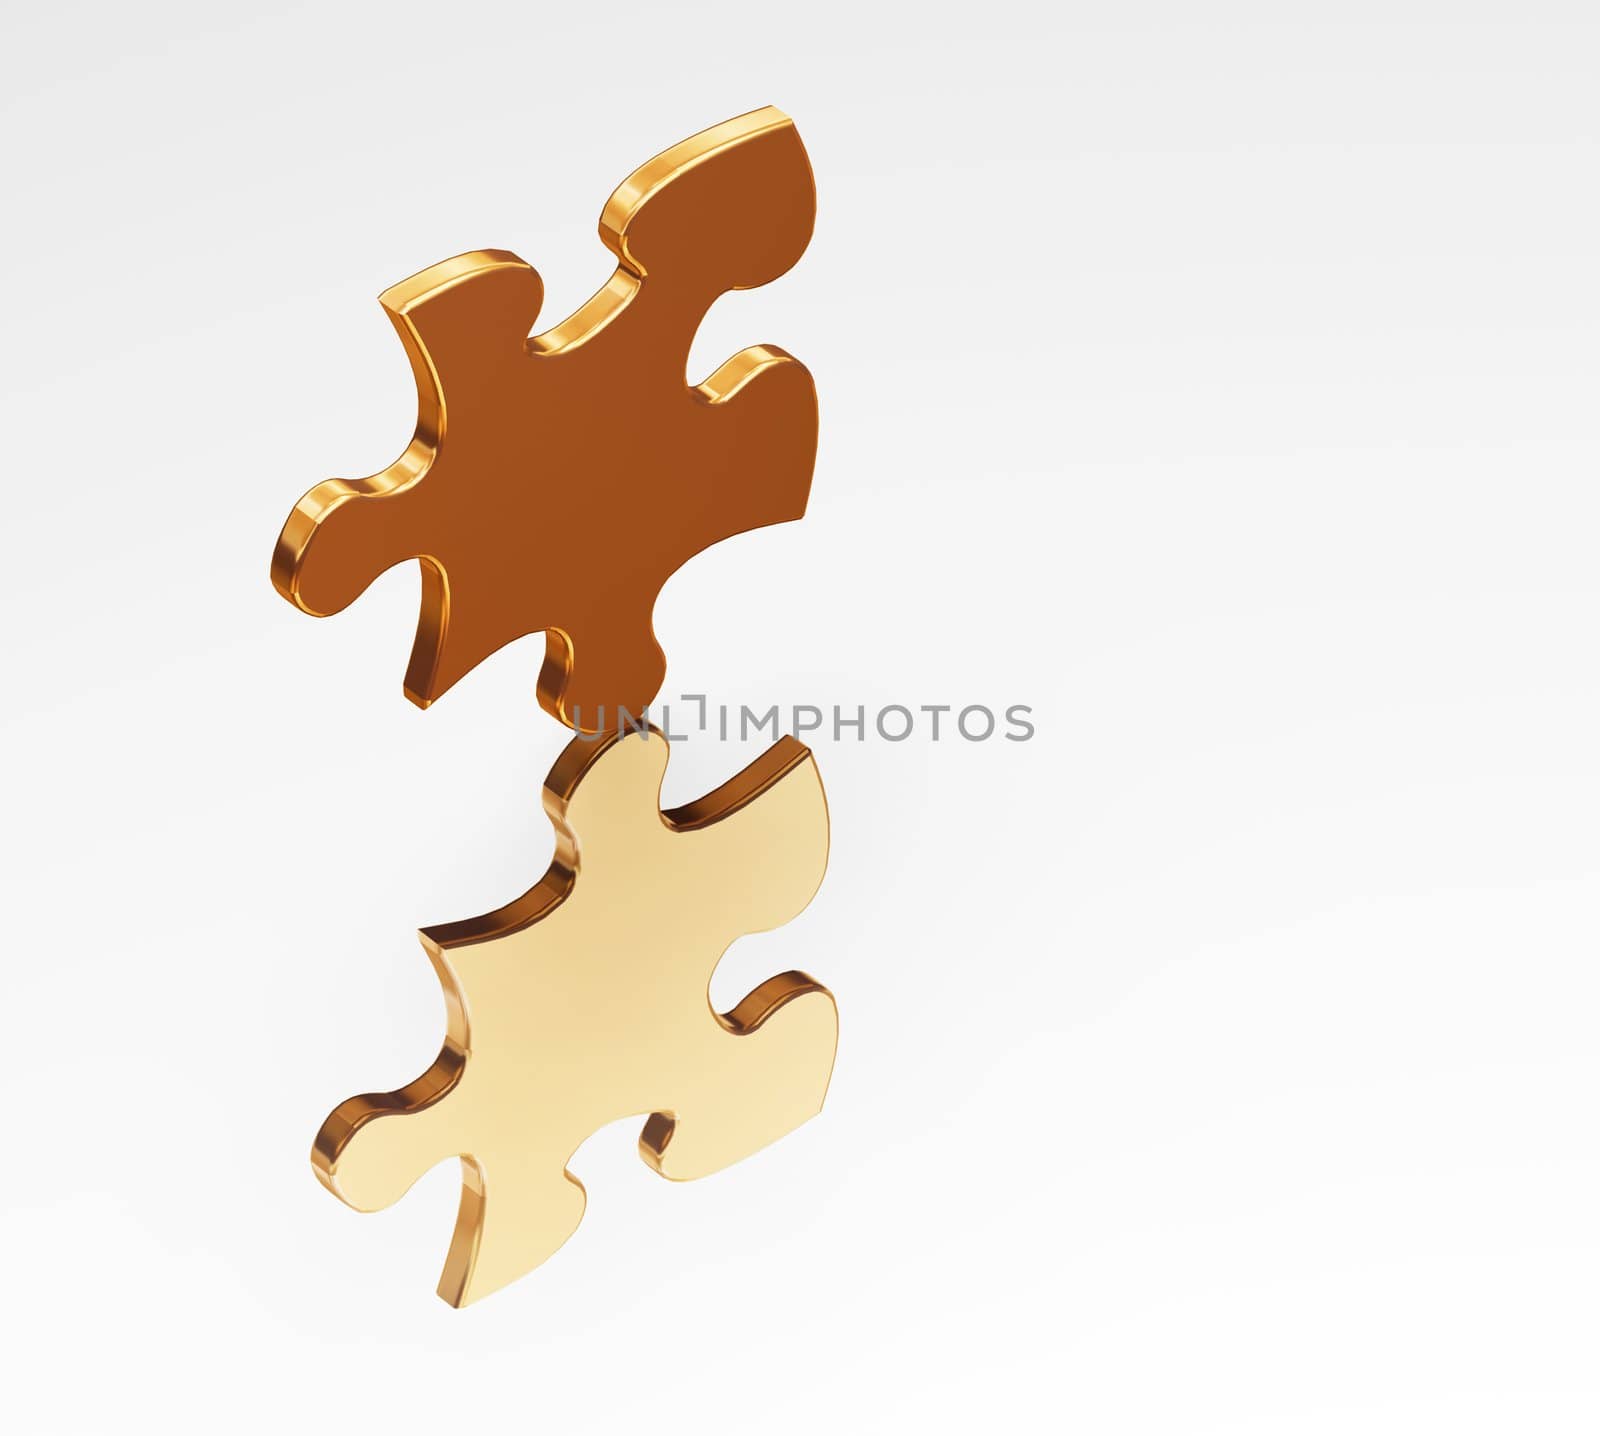 3D render of a balancing puzzle piece